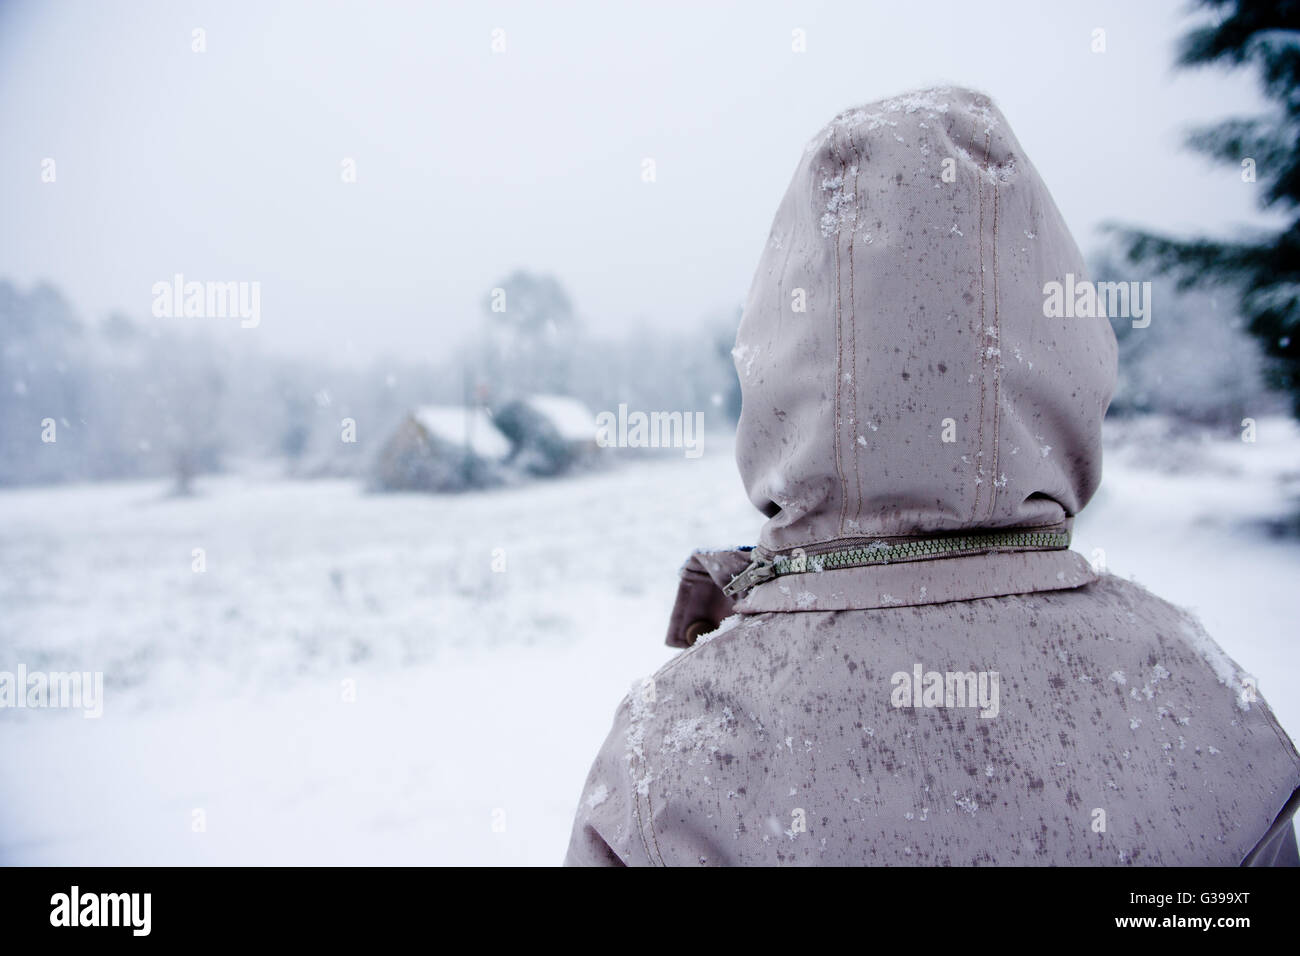 Boy looks out over a wintry landscape Dordogne France Stock Photo